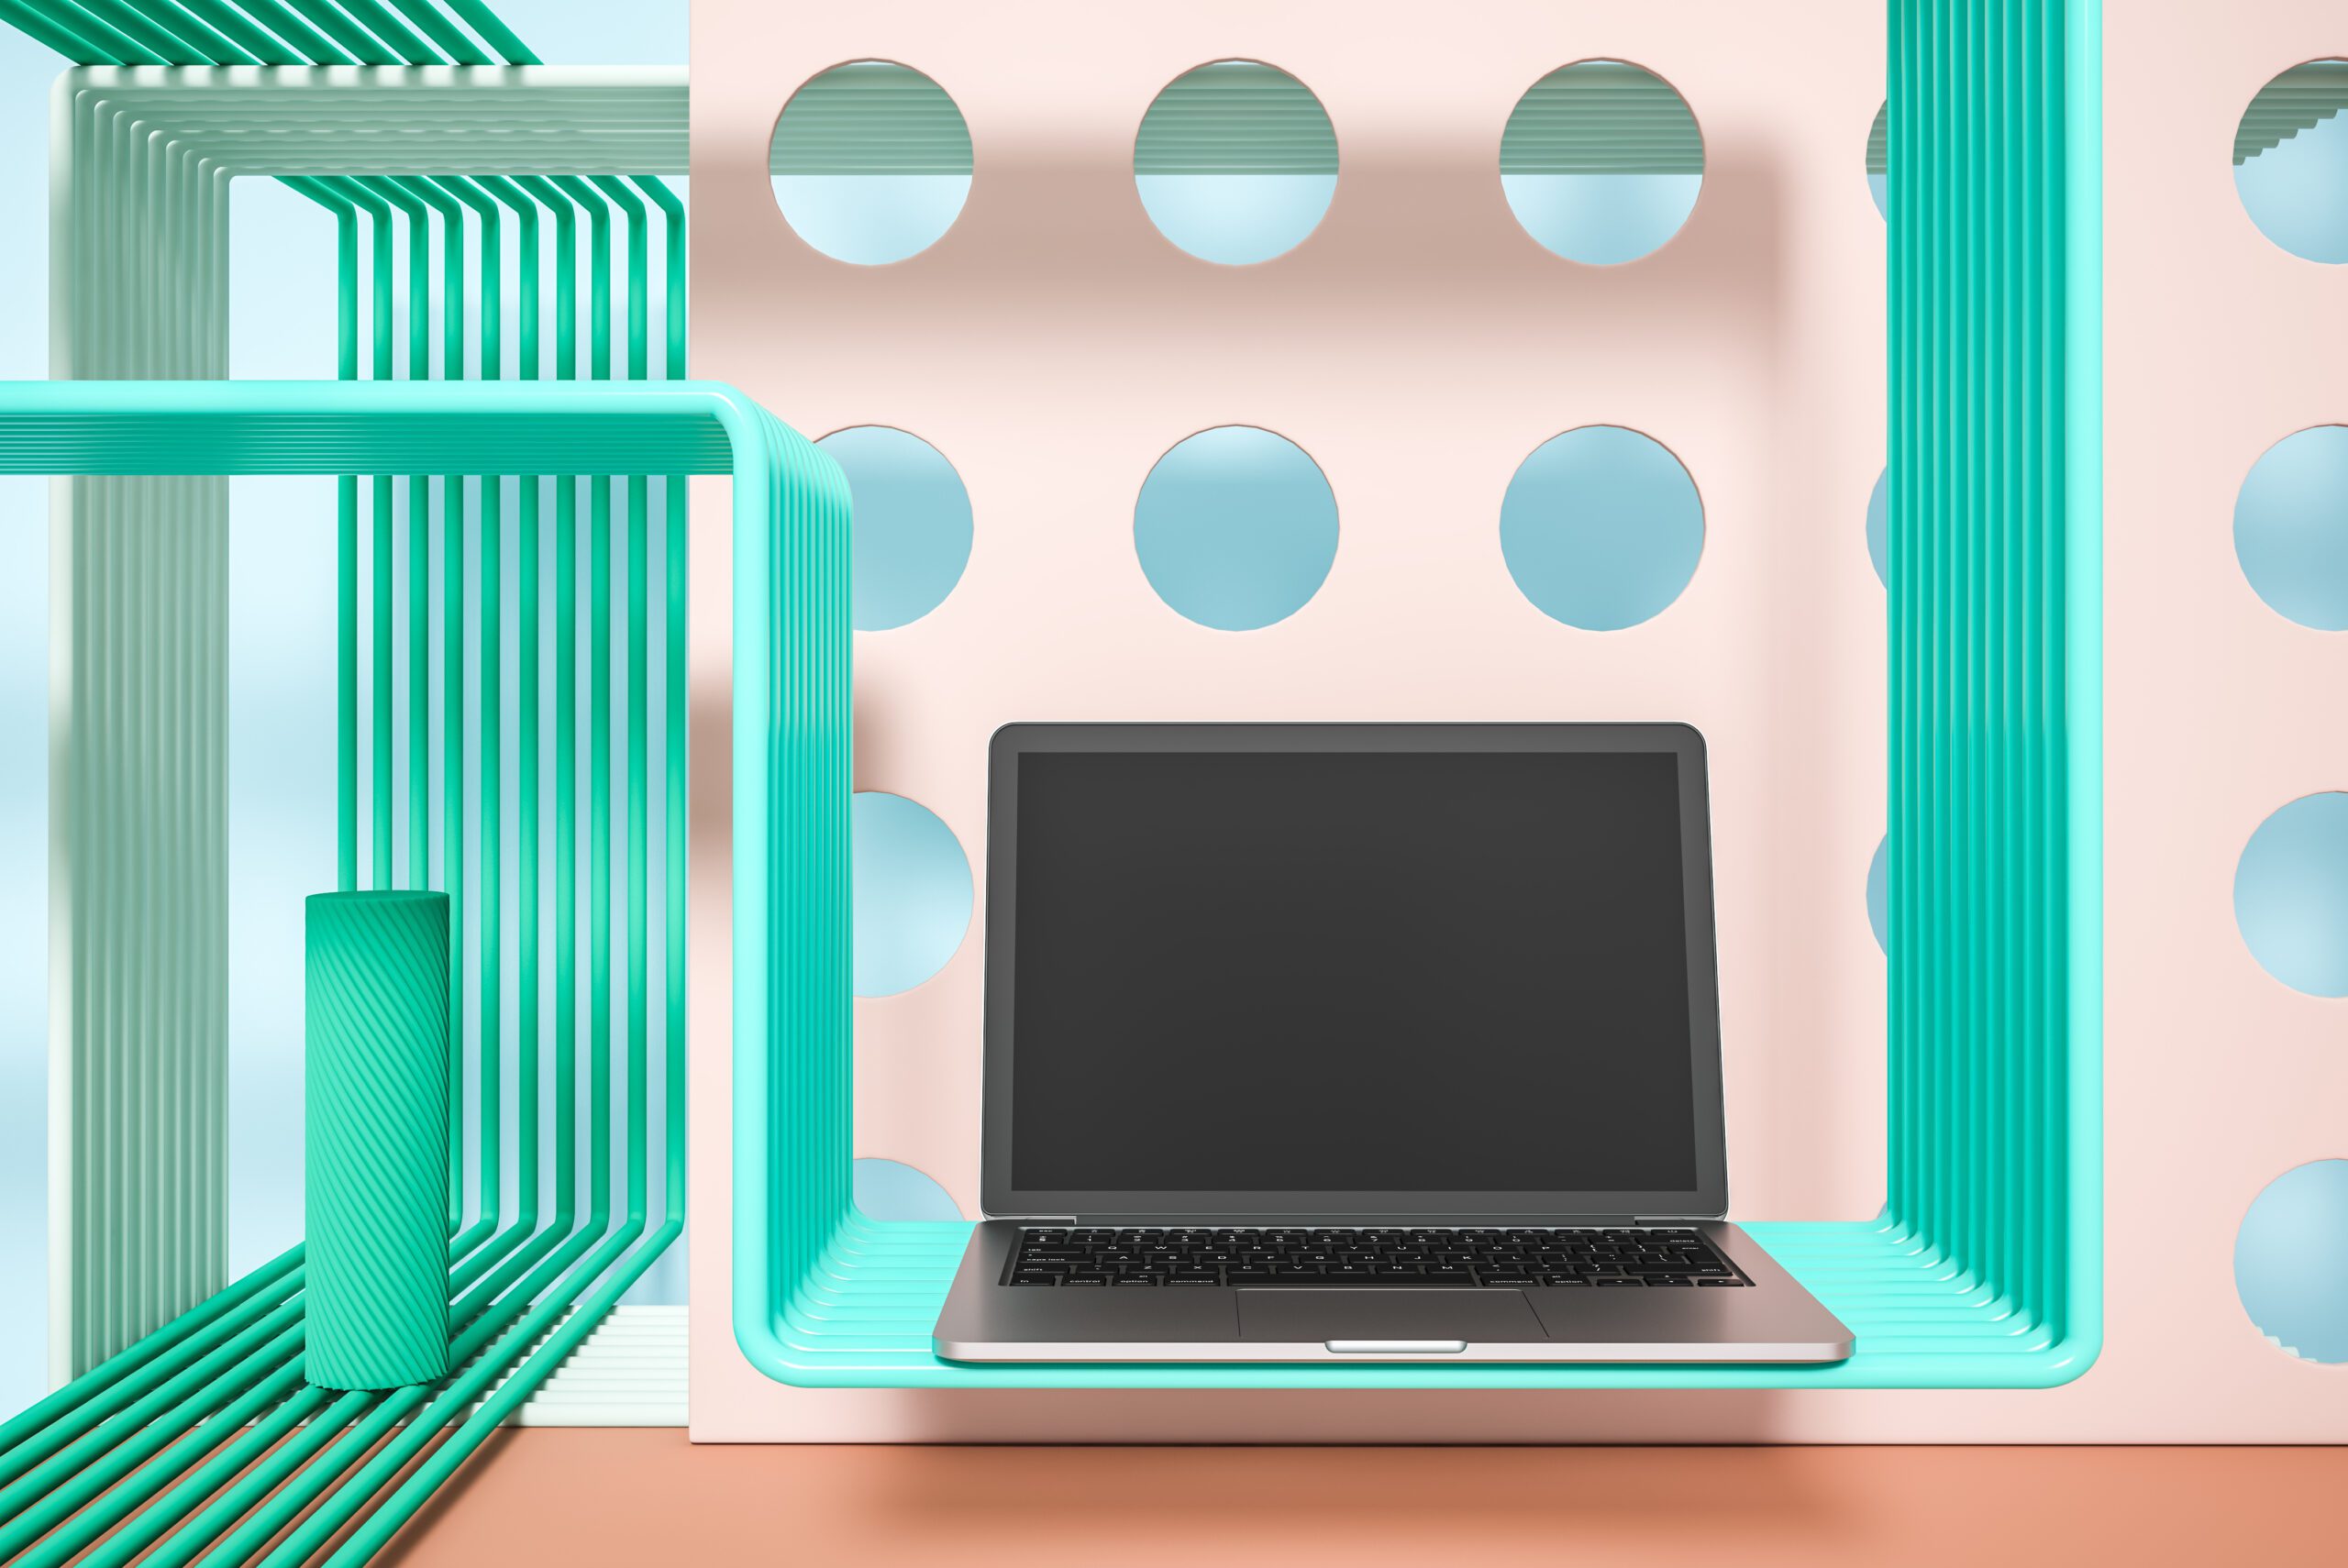 Laptop-over-geometric-background-with-pipes